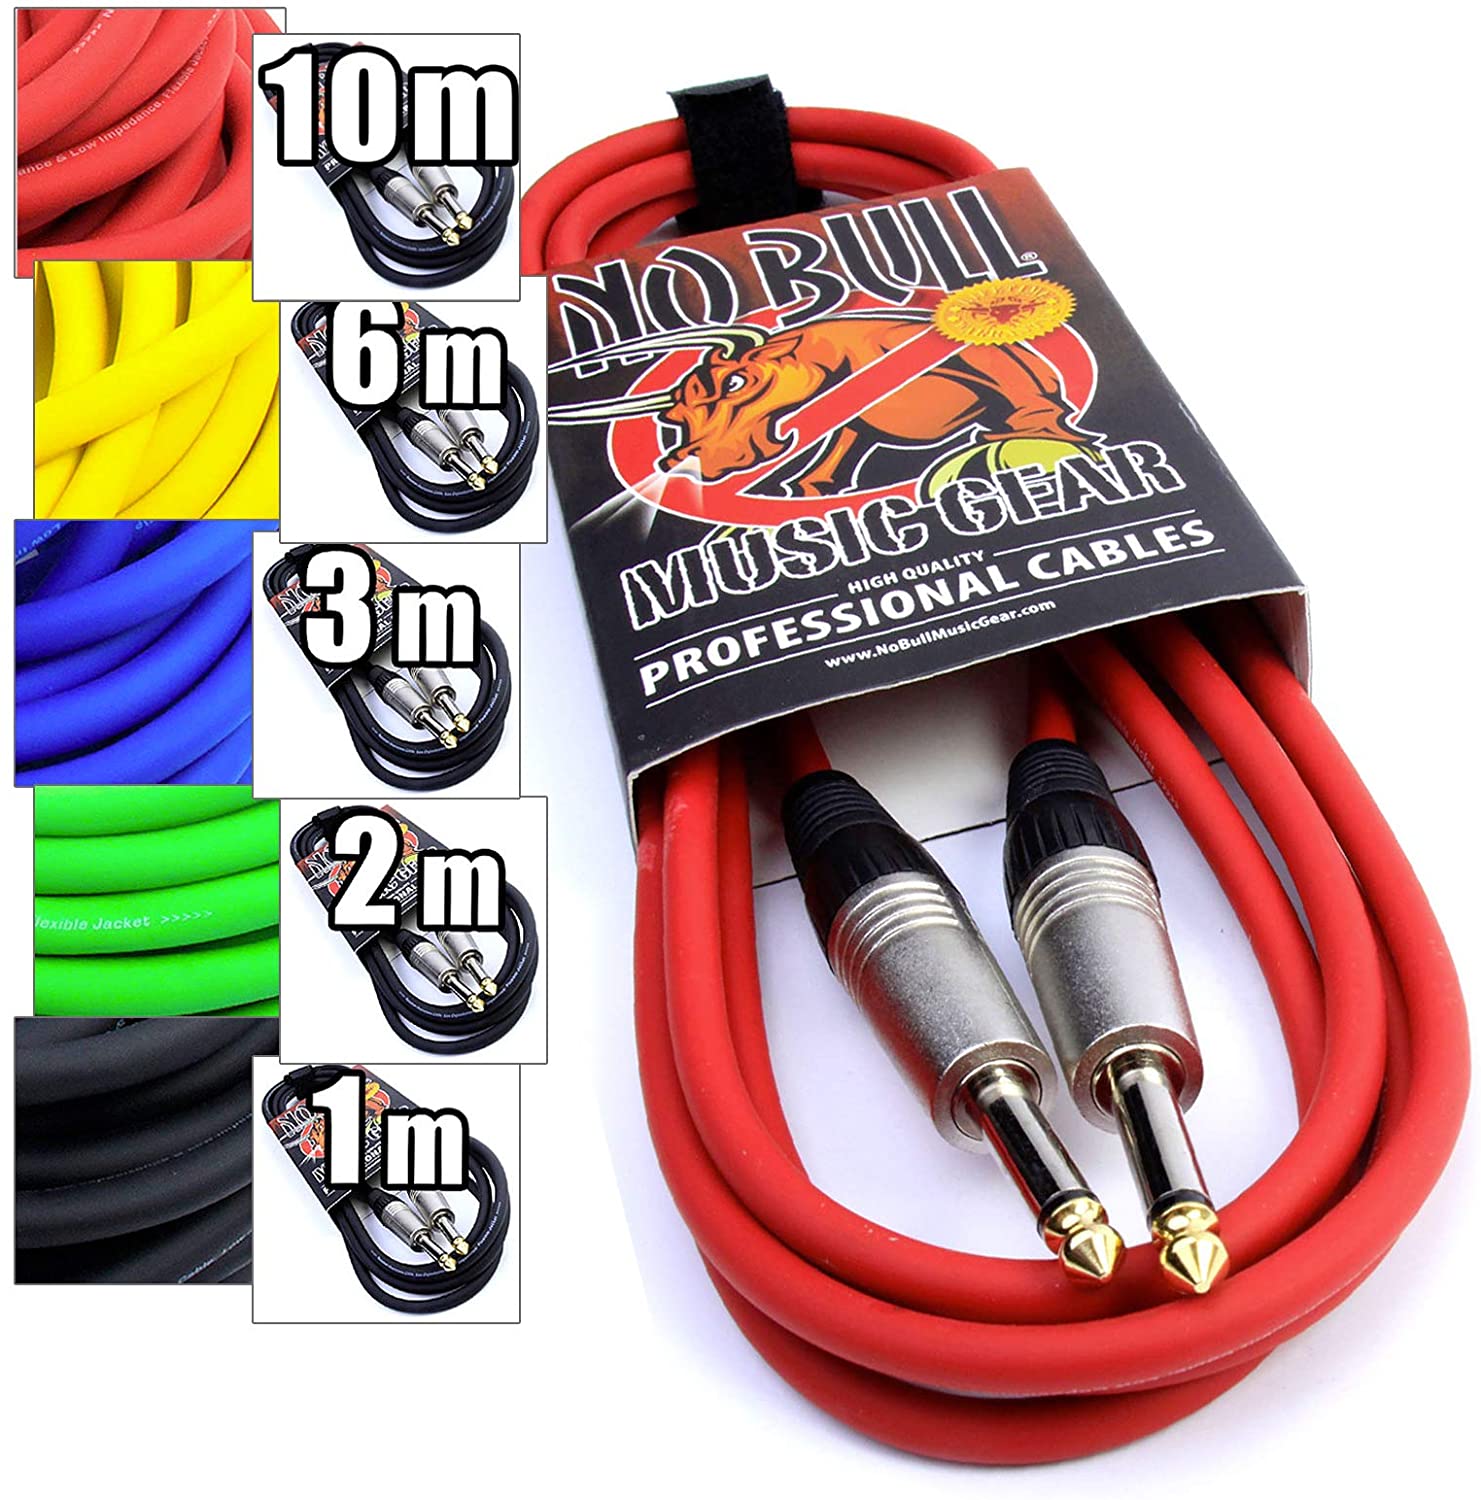 Premium Guitar/Instrument Cable (Red, 10ft / 3m, Straight Plugs) - Heavy Duty Pro 1/4" Jack to Jack Noiseless Mono Lead - Coloured Link Lead to Amplifier/Amp + Cable Tie